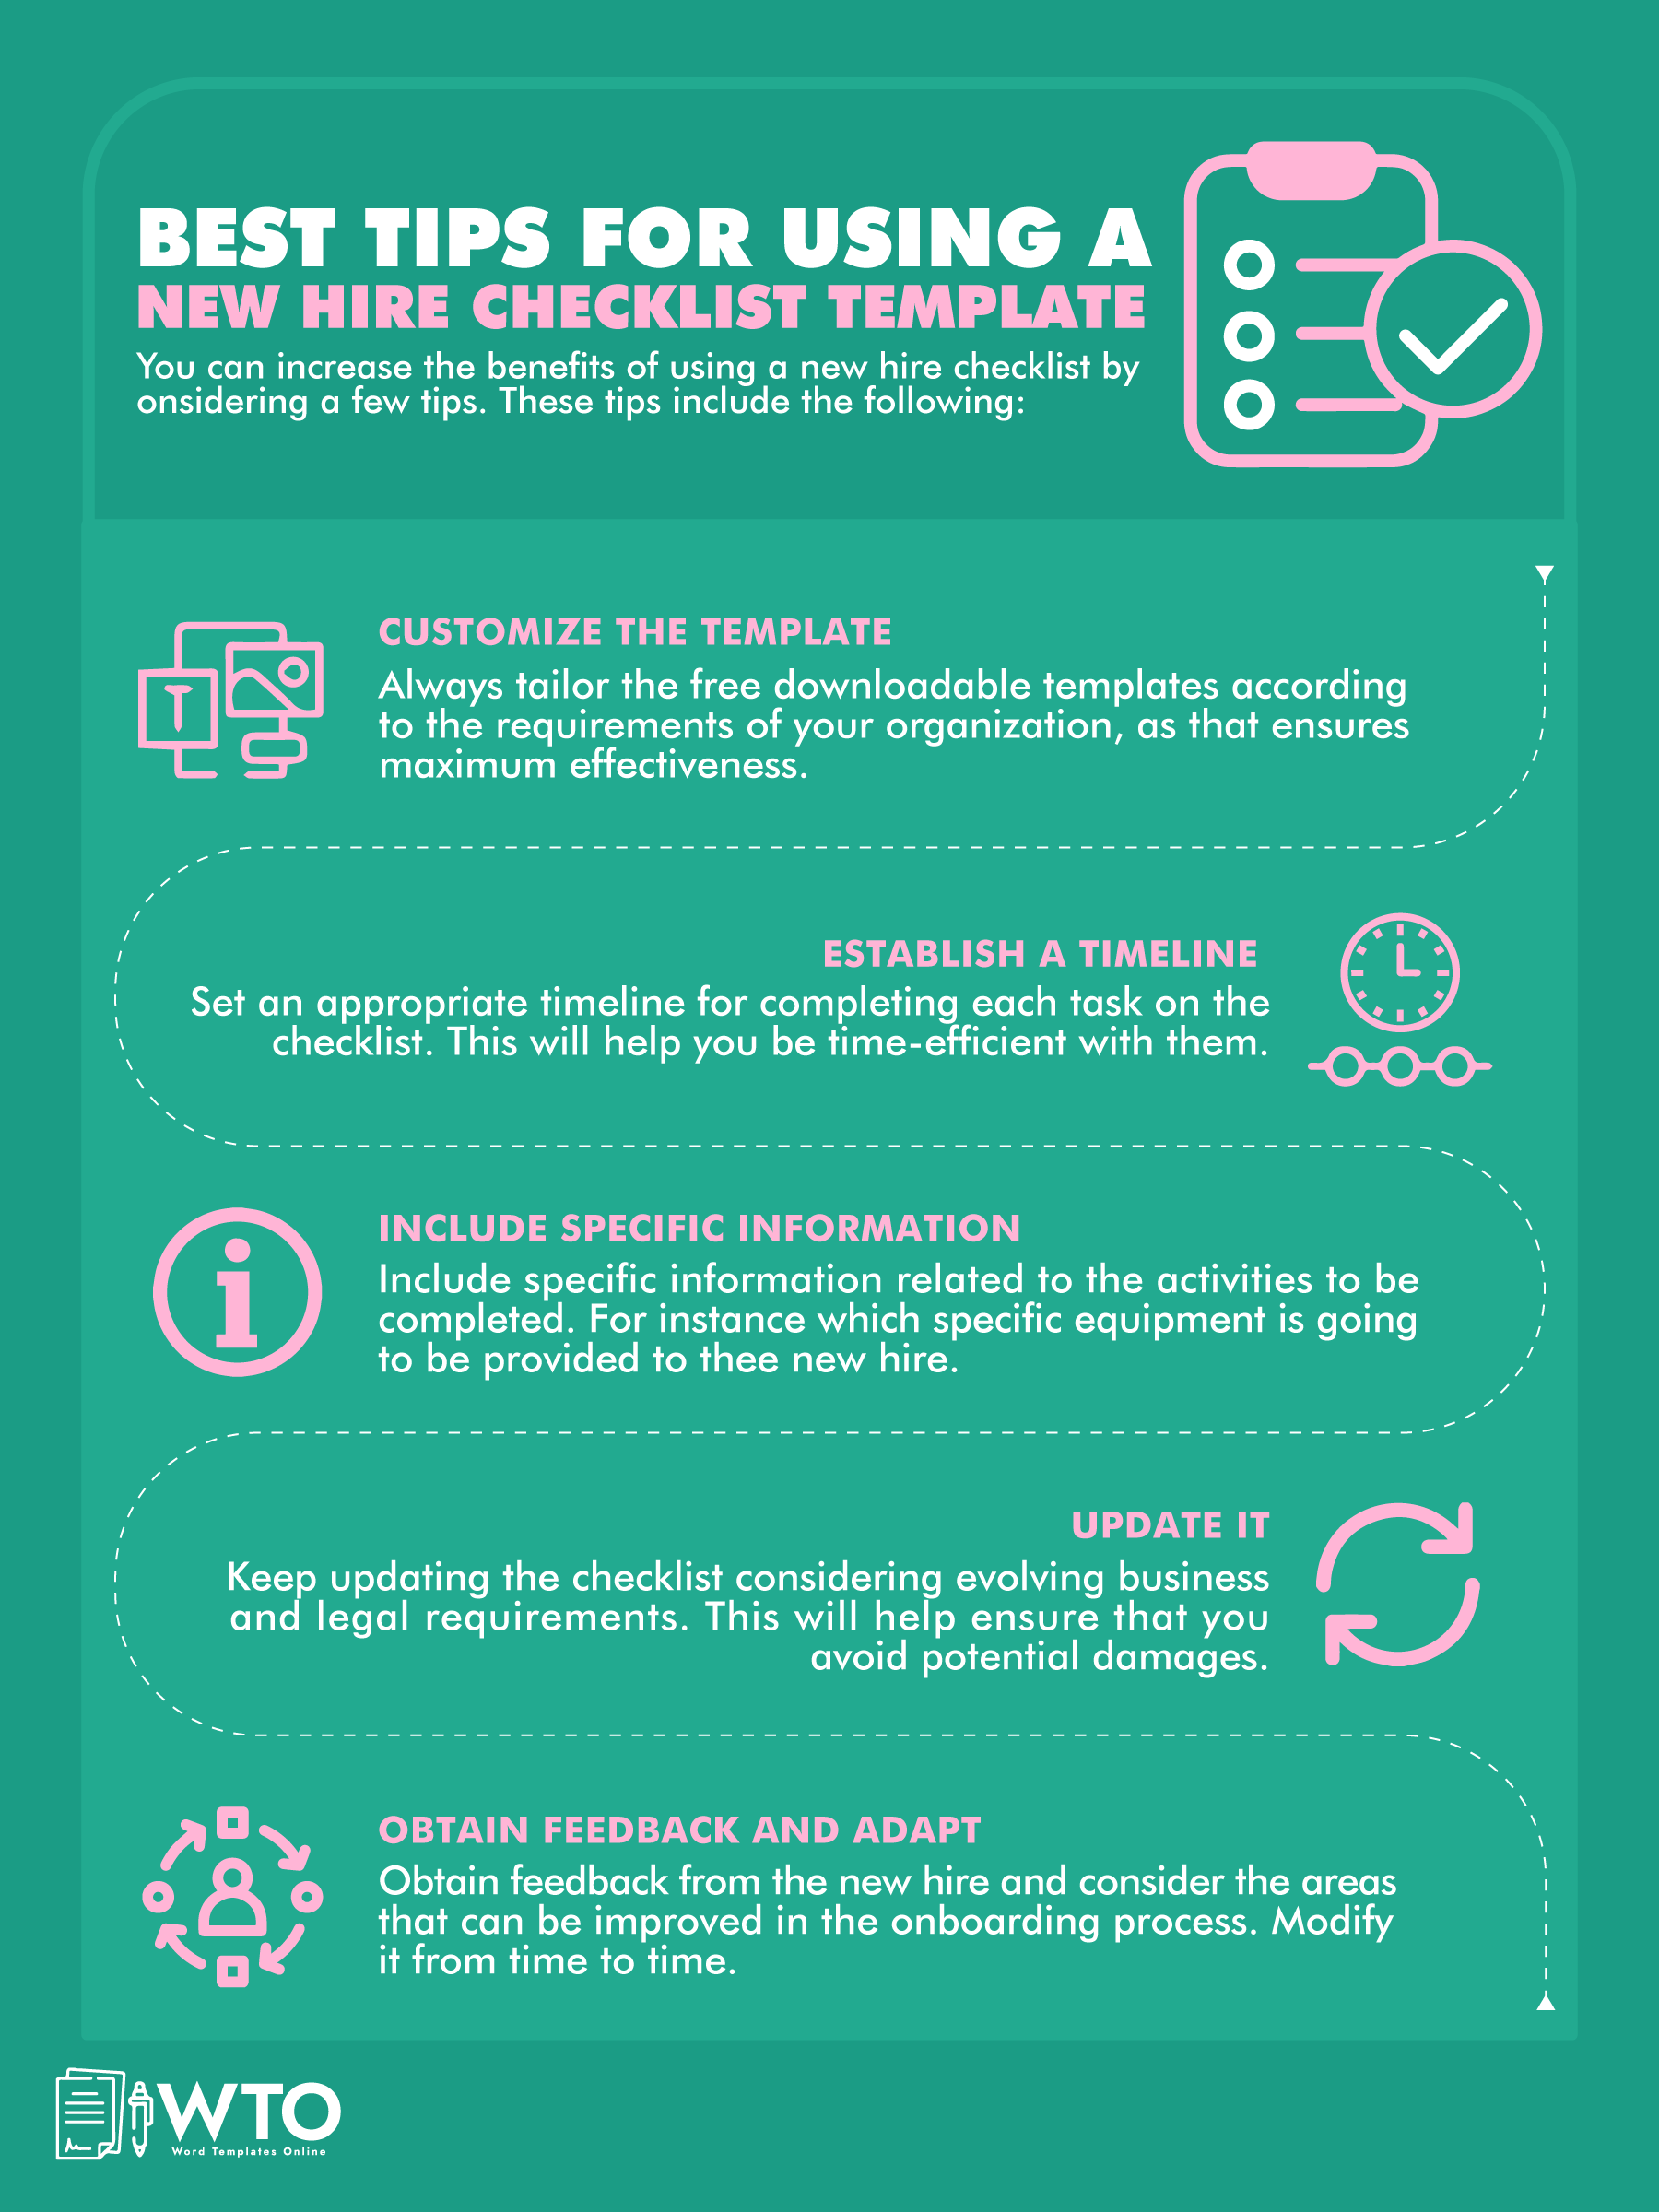 This infographic includes best tips to use a new hire checklist.